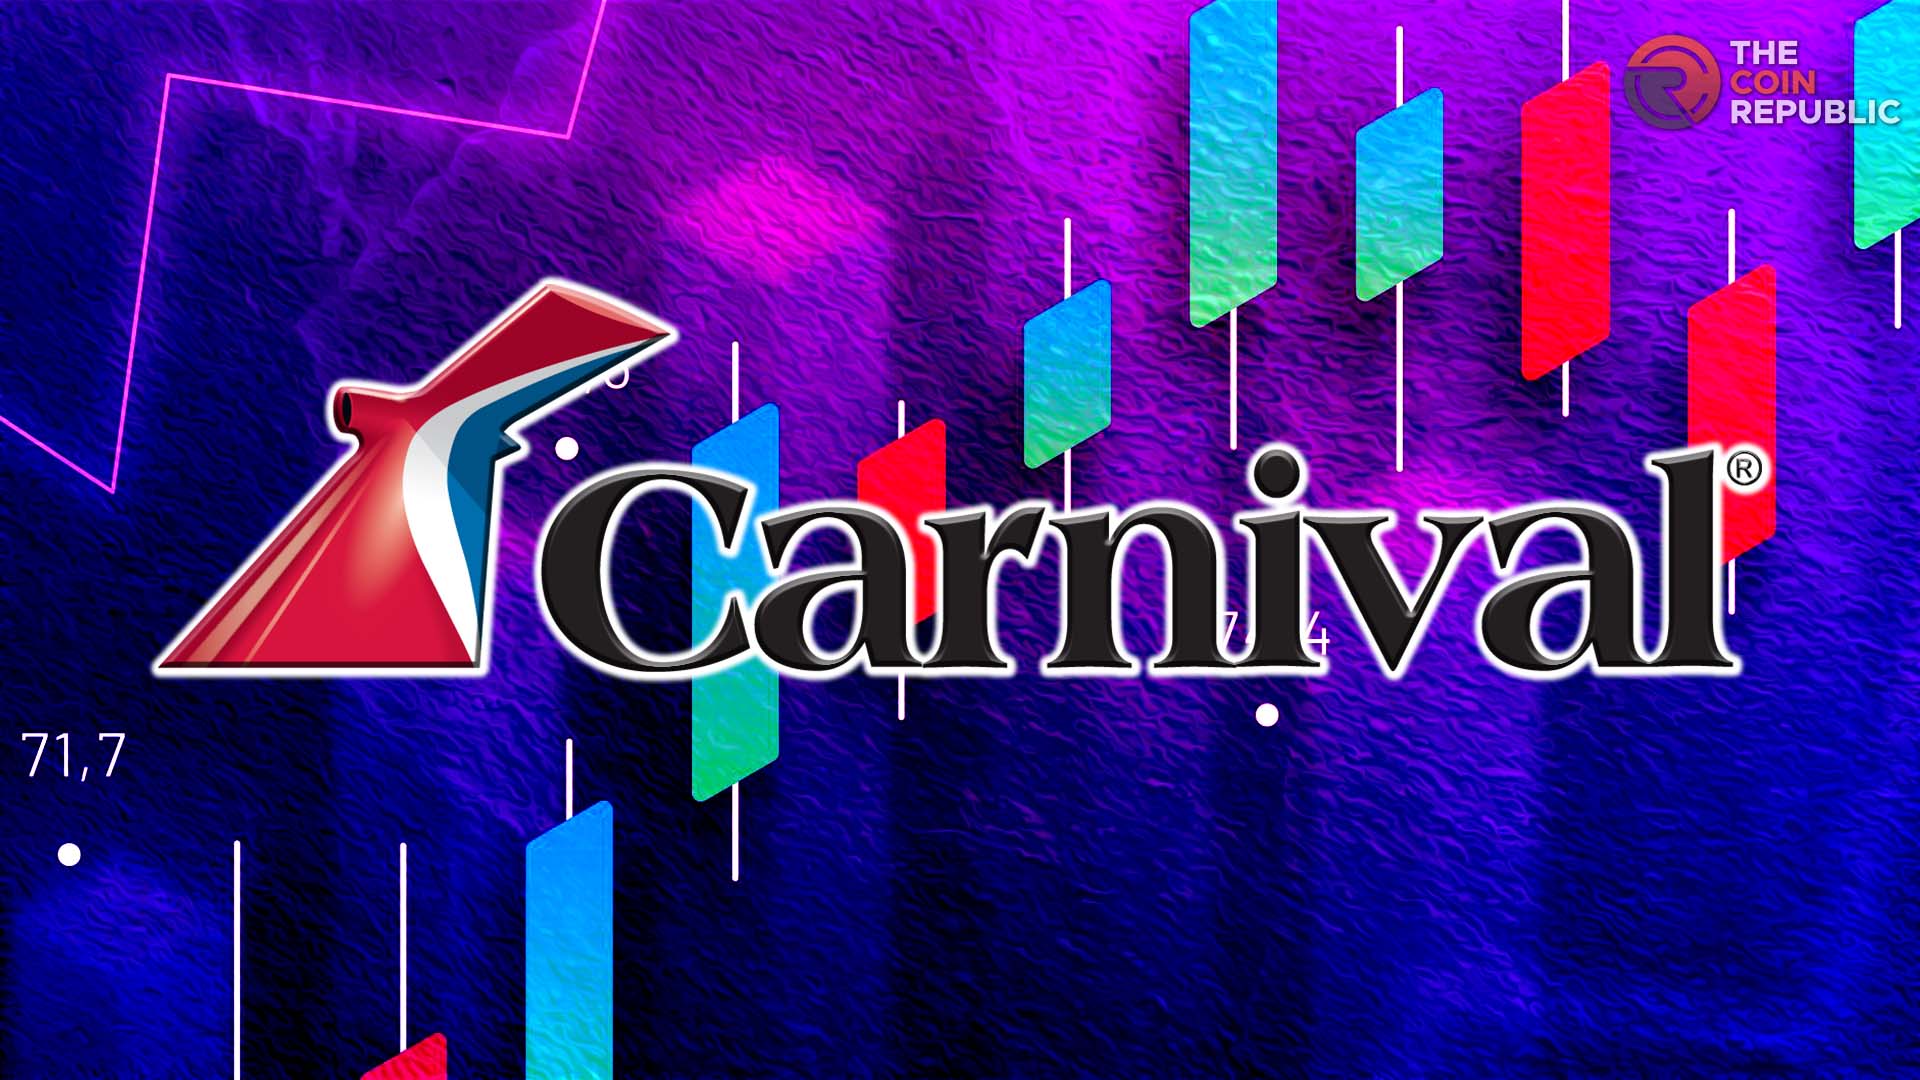 CCL Stock Price: Carnival Corporation Knocked by Bears to Plunge